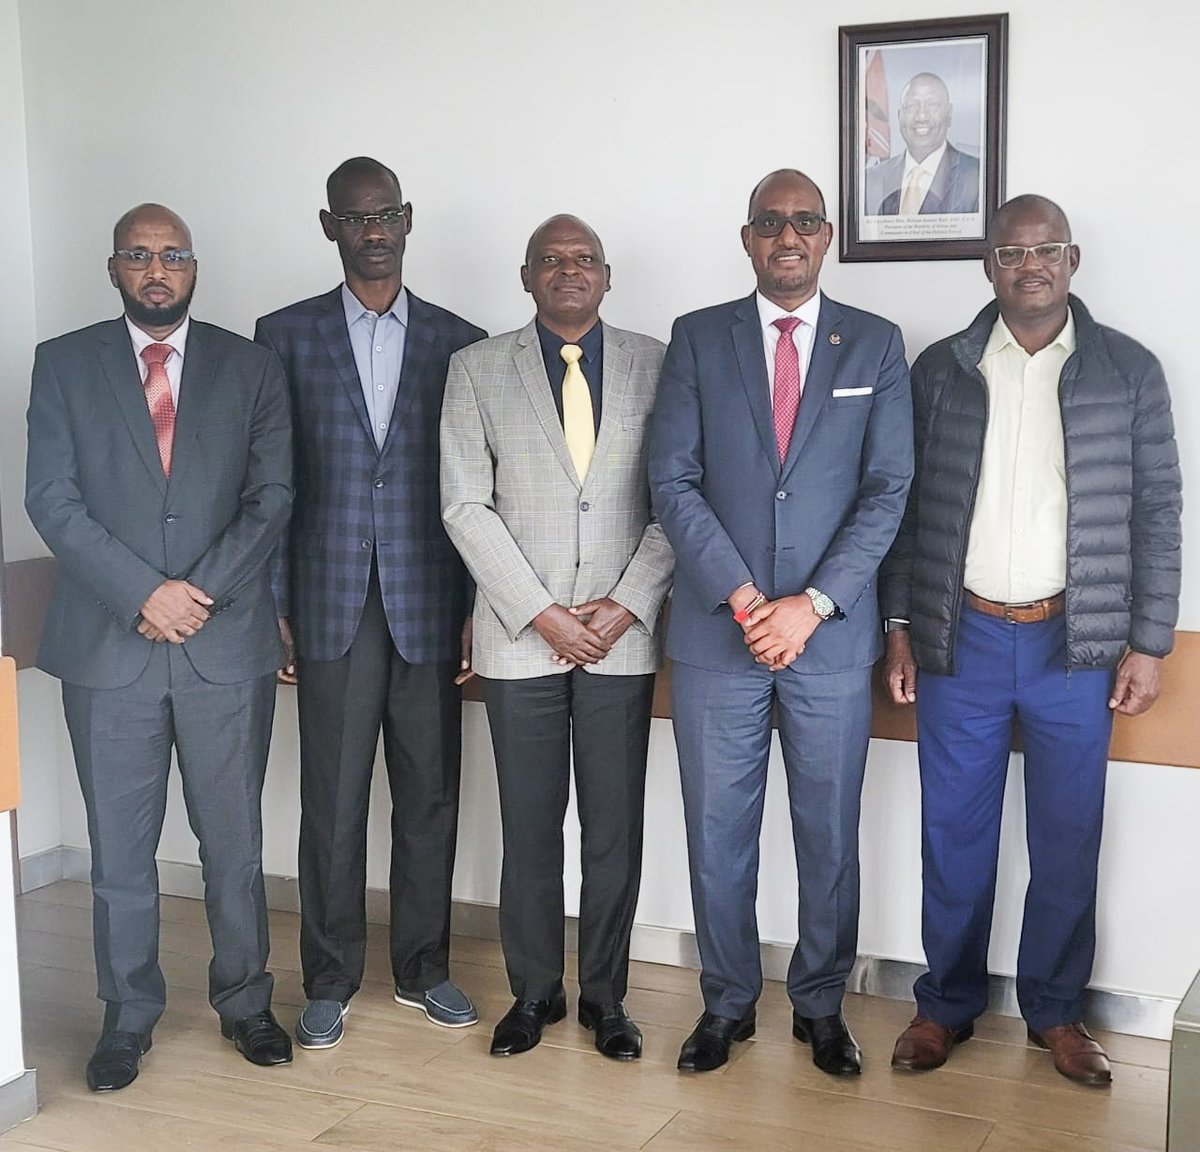 The Director of the Middle East Directorate, Mr. Abdishakur Hussein @ASHAKURHUSSEIN earlier today held a pre-departure consultative meeting with the newly-appointed Ambassadors for stations in the Middle Eastern region. 

Present were: H.E. Ambassador Lt. General (Rtd.) Jonah…